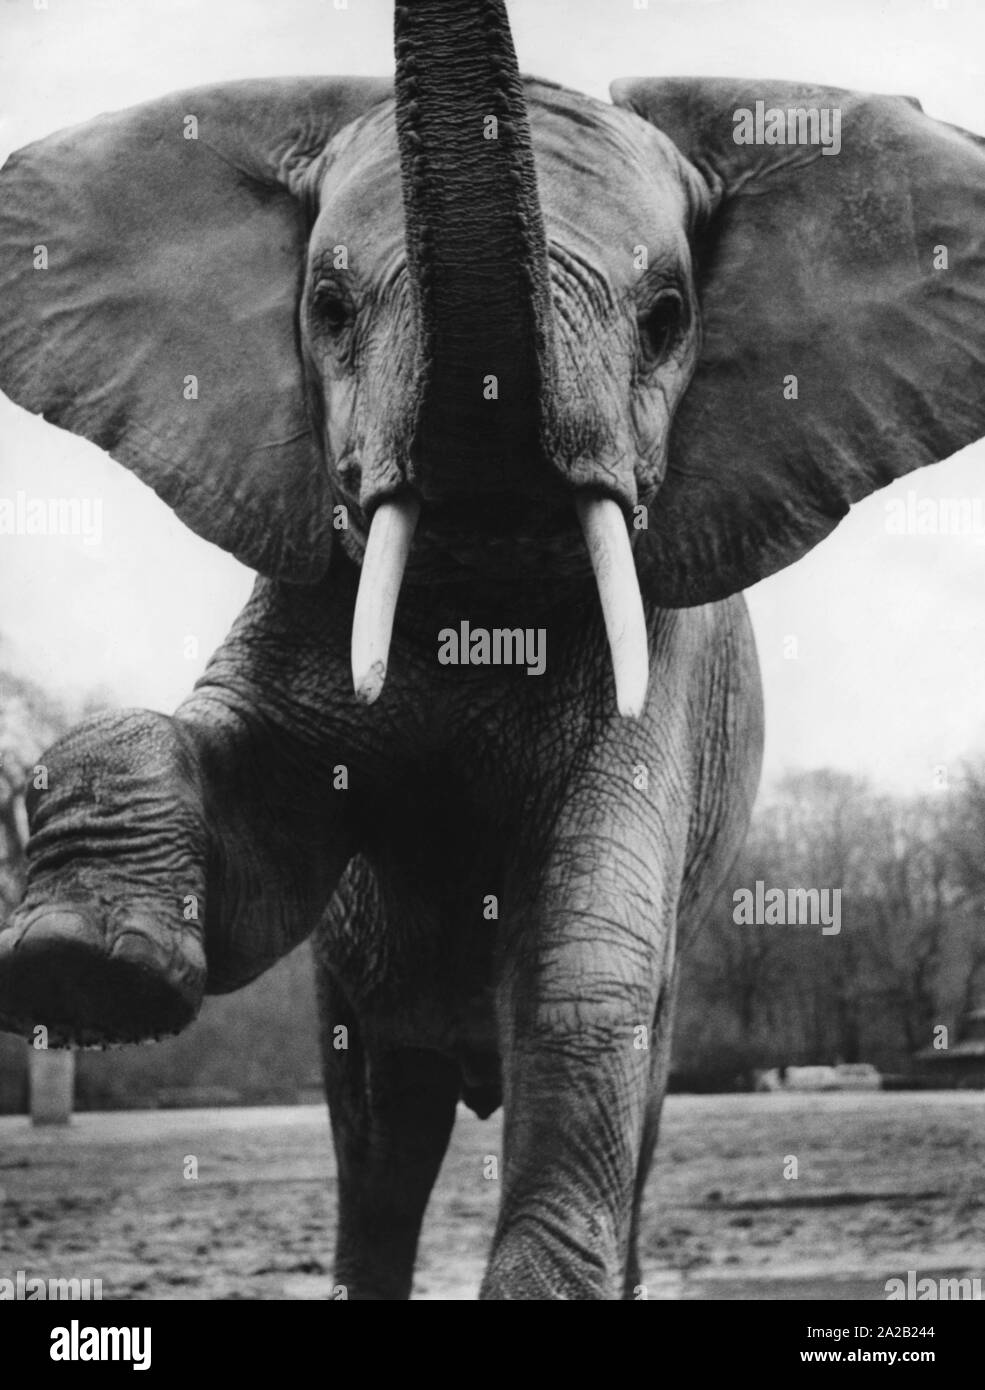 An elephant in a German zoo. Undated photo, probably in the 1960s. Stock Photo